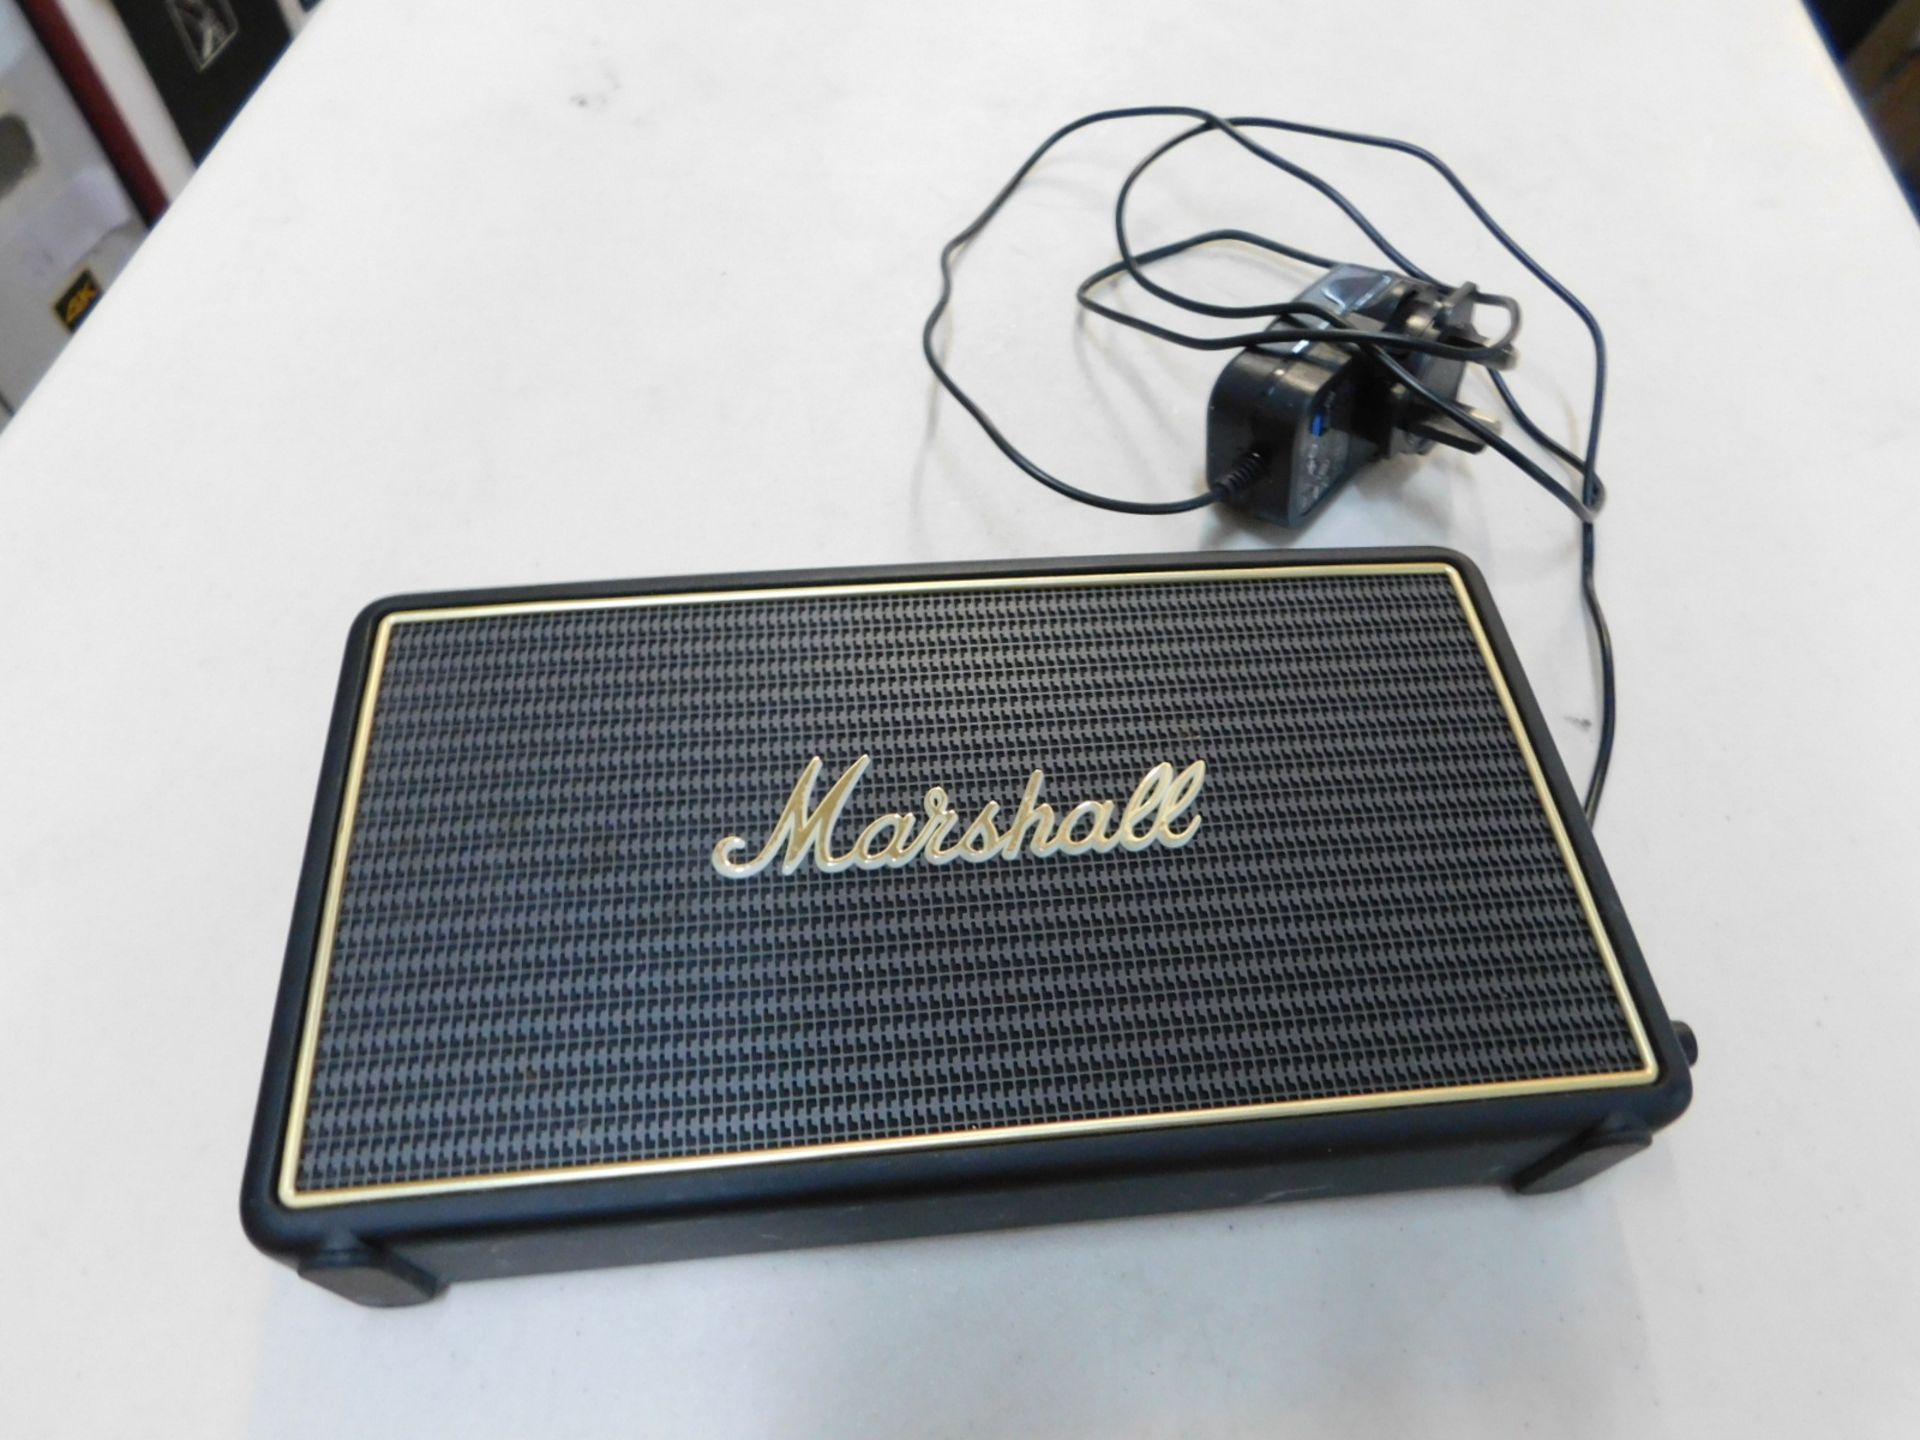 1 MARSHALL STOCKWELL BLUETOOTH PORTABLE SPEAKER RRP £149.99 (TESTED WORKING)